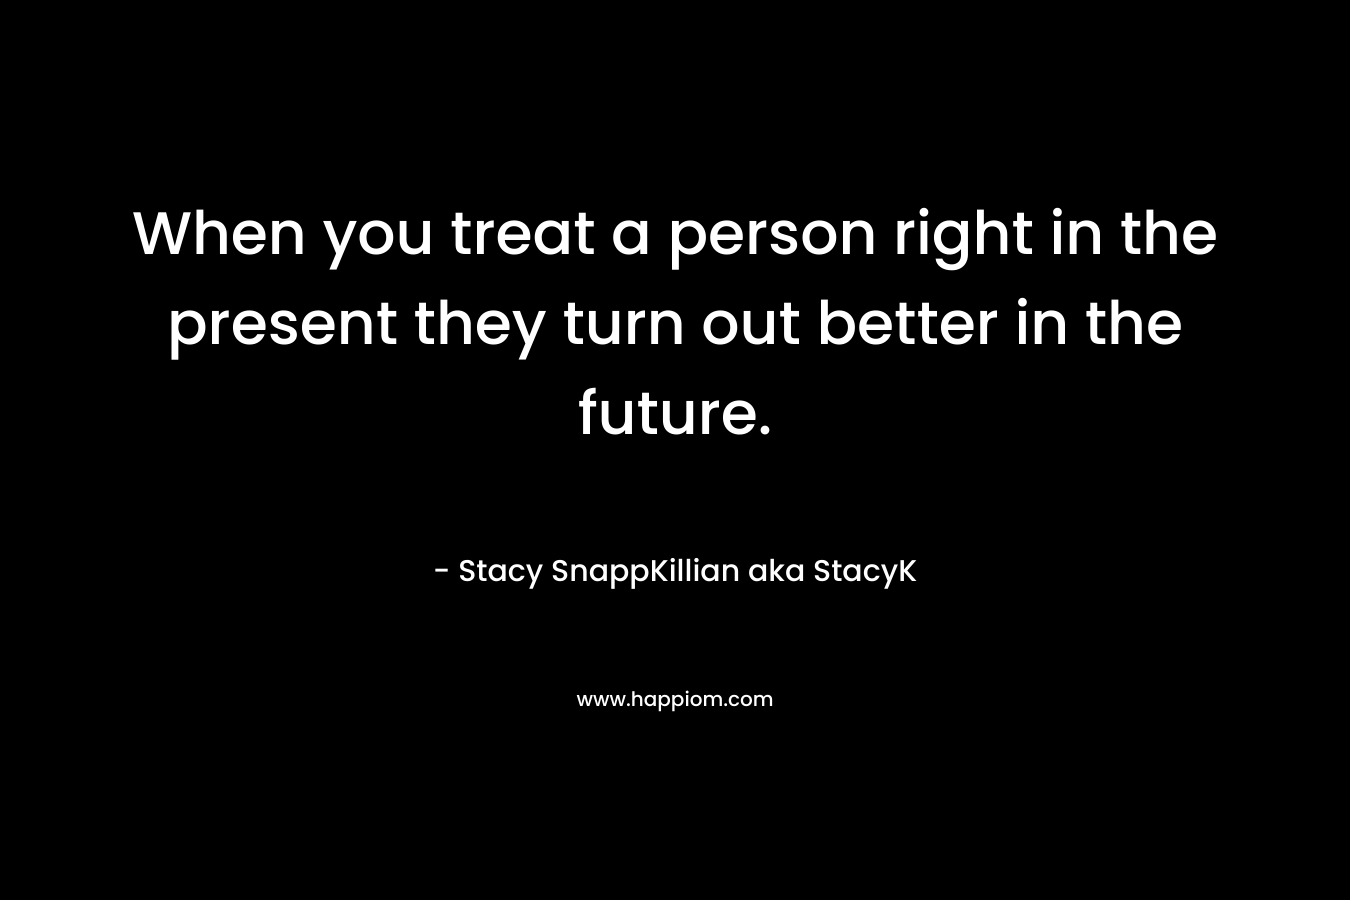 When you treat a person right in the present they turn out better in the future. – Stacy SnappKillian aka StacyK